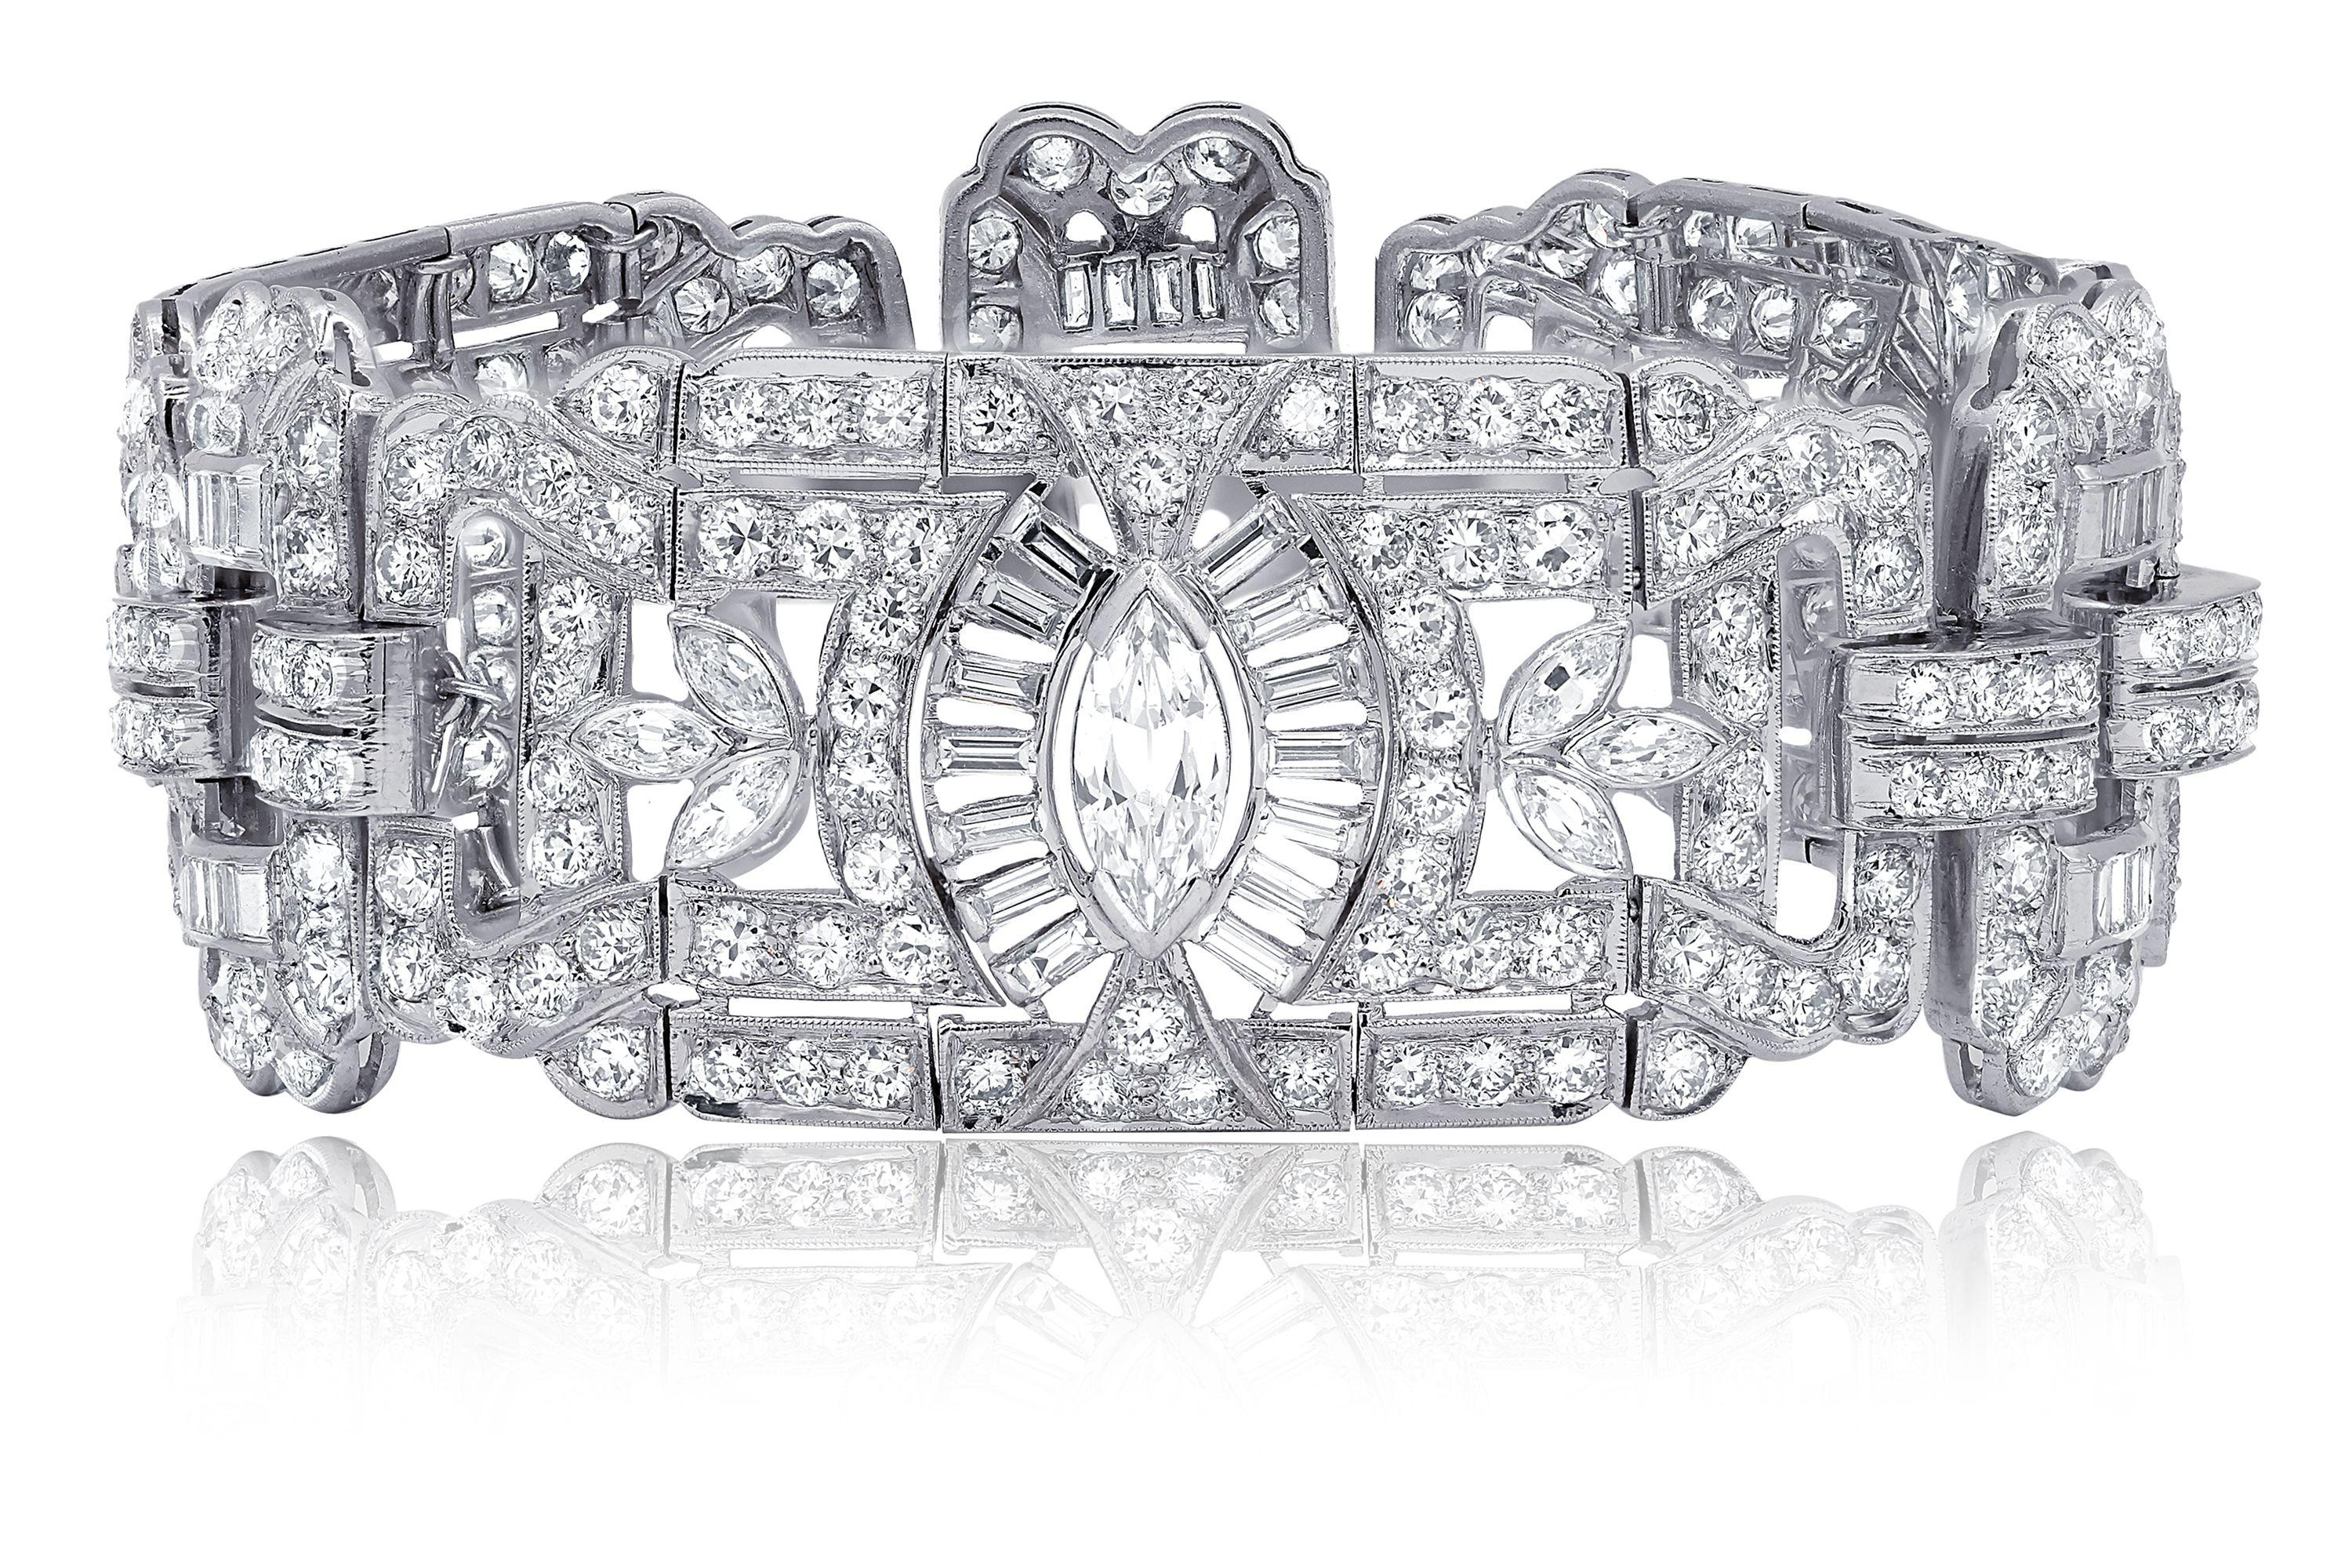 Deco Diamond bracelet with marquise, baguette and round diamonds. Three large marquise stone, total weight of diamonds 23.00 carats  
 Circa 1950's
Like new 